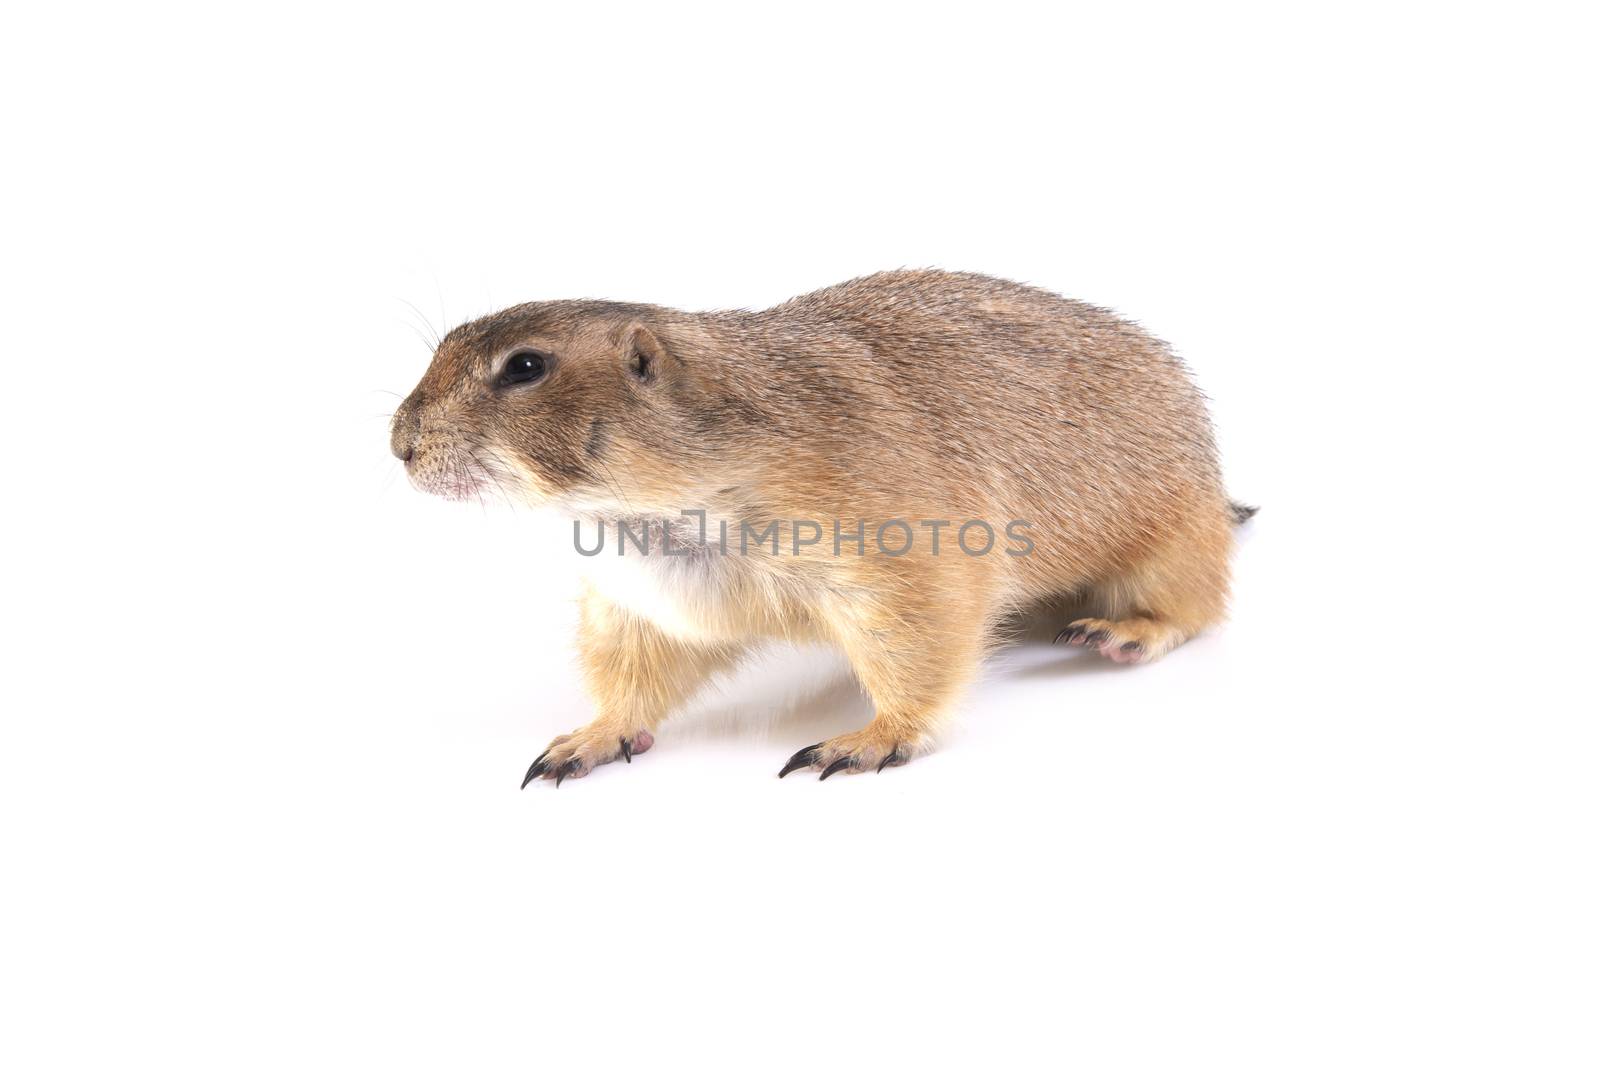 Sideview of prairie dog walking on white background.